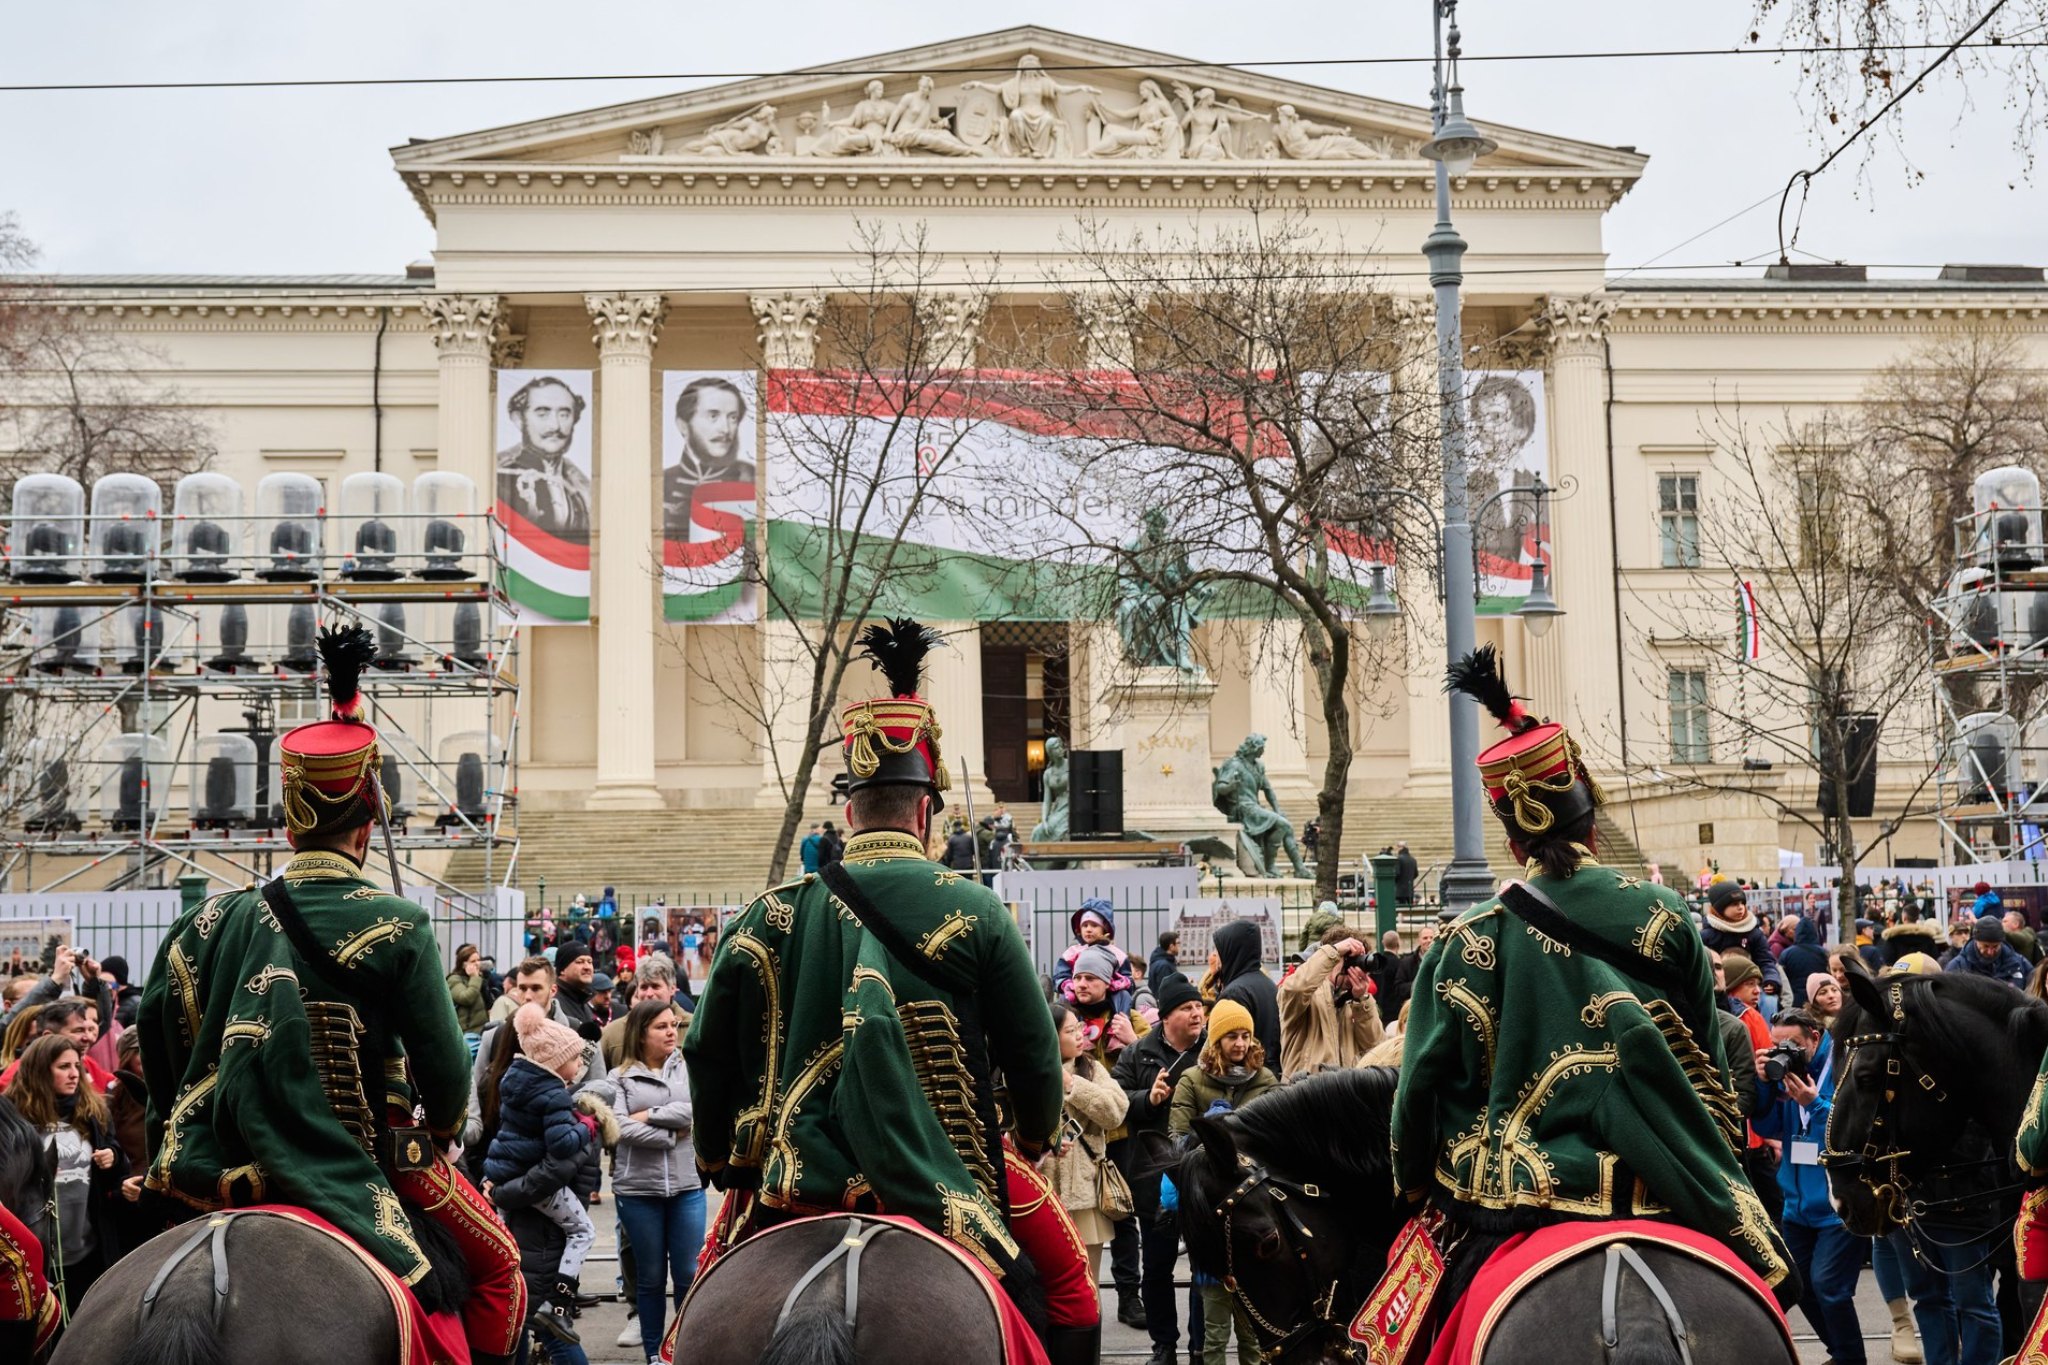 Three Days of Free Activities at the National Museum on the Occasion of March 15